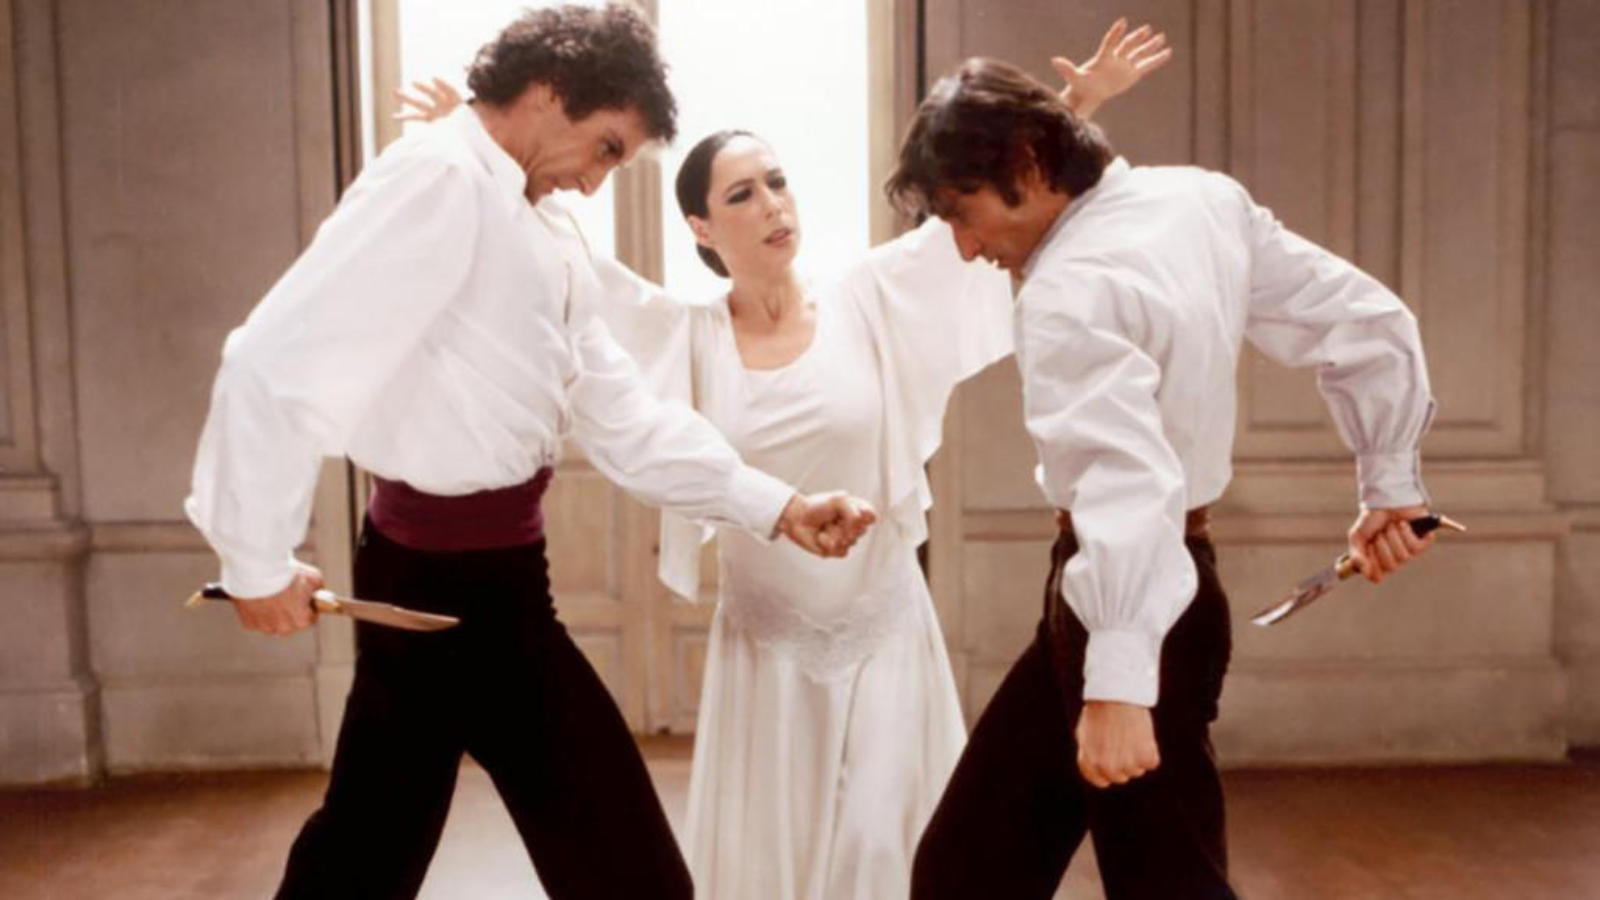 Still from Bodas de Sangra. A WOMAN AND TWO MEN DRESSED IN BACL AND WHITE STANDING OPPOSITE EACH OTHER WHILE DANCING.